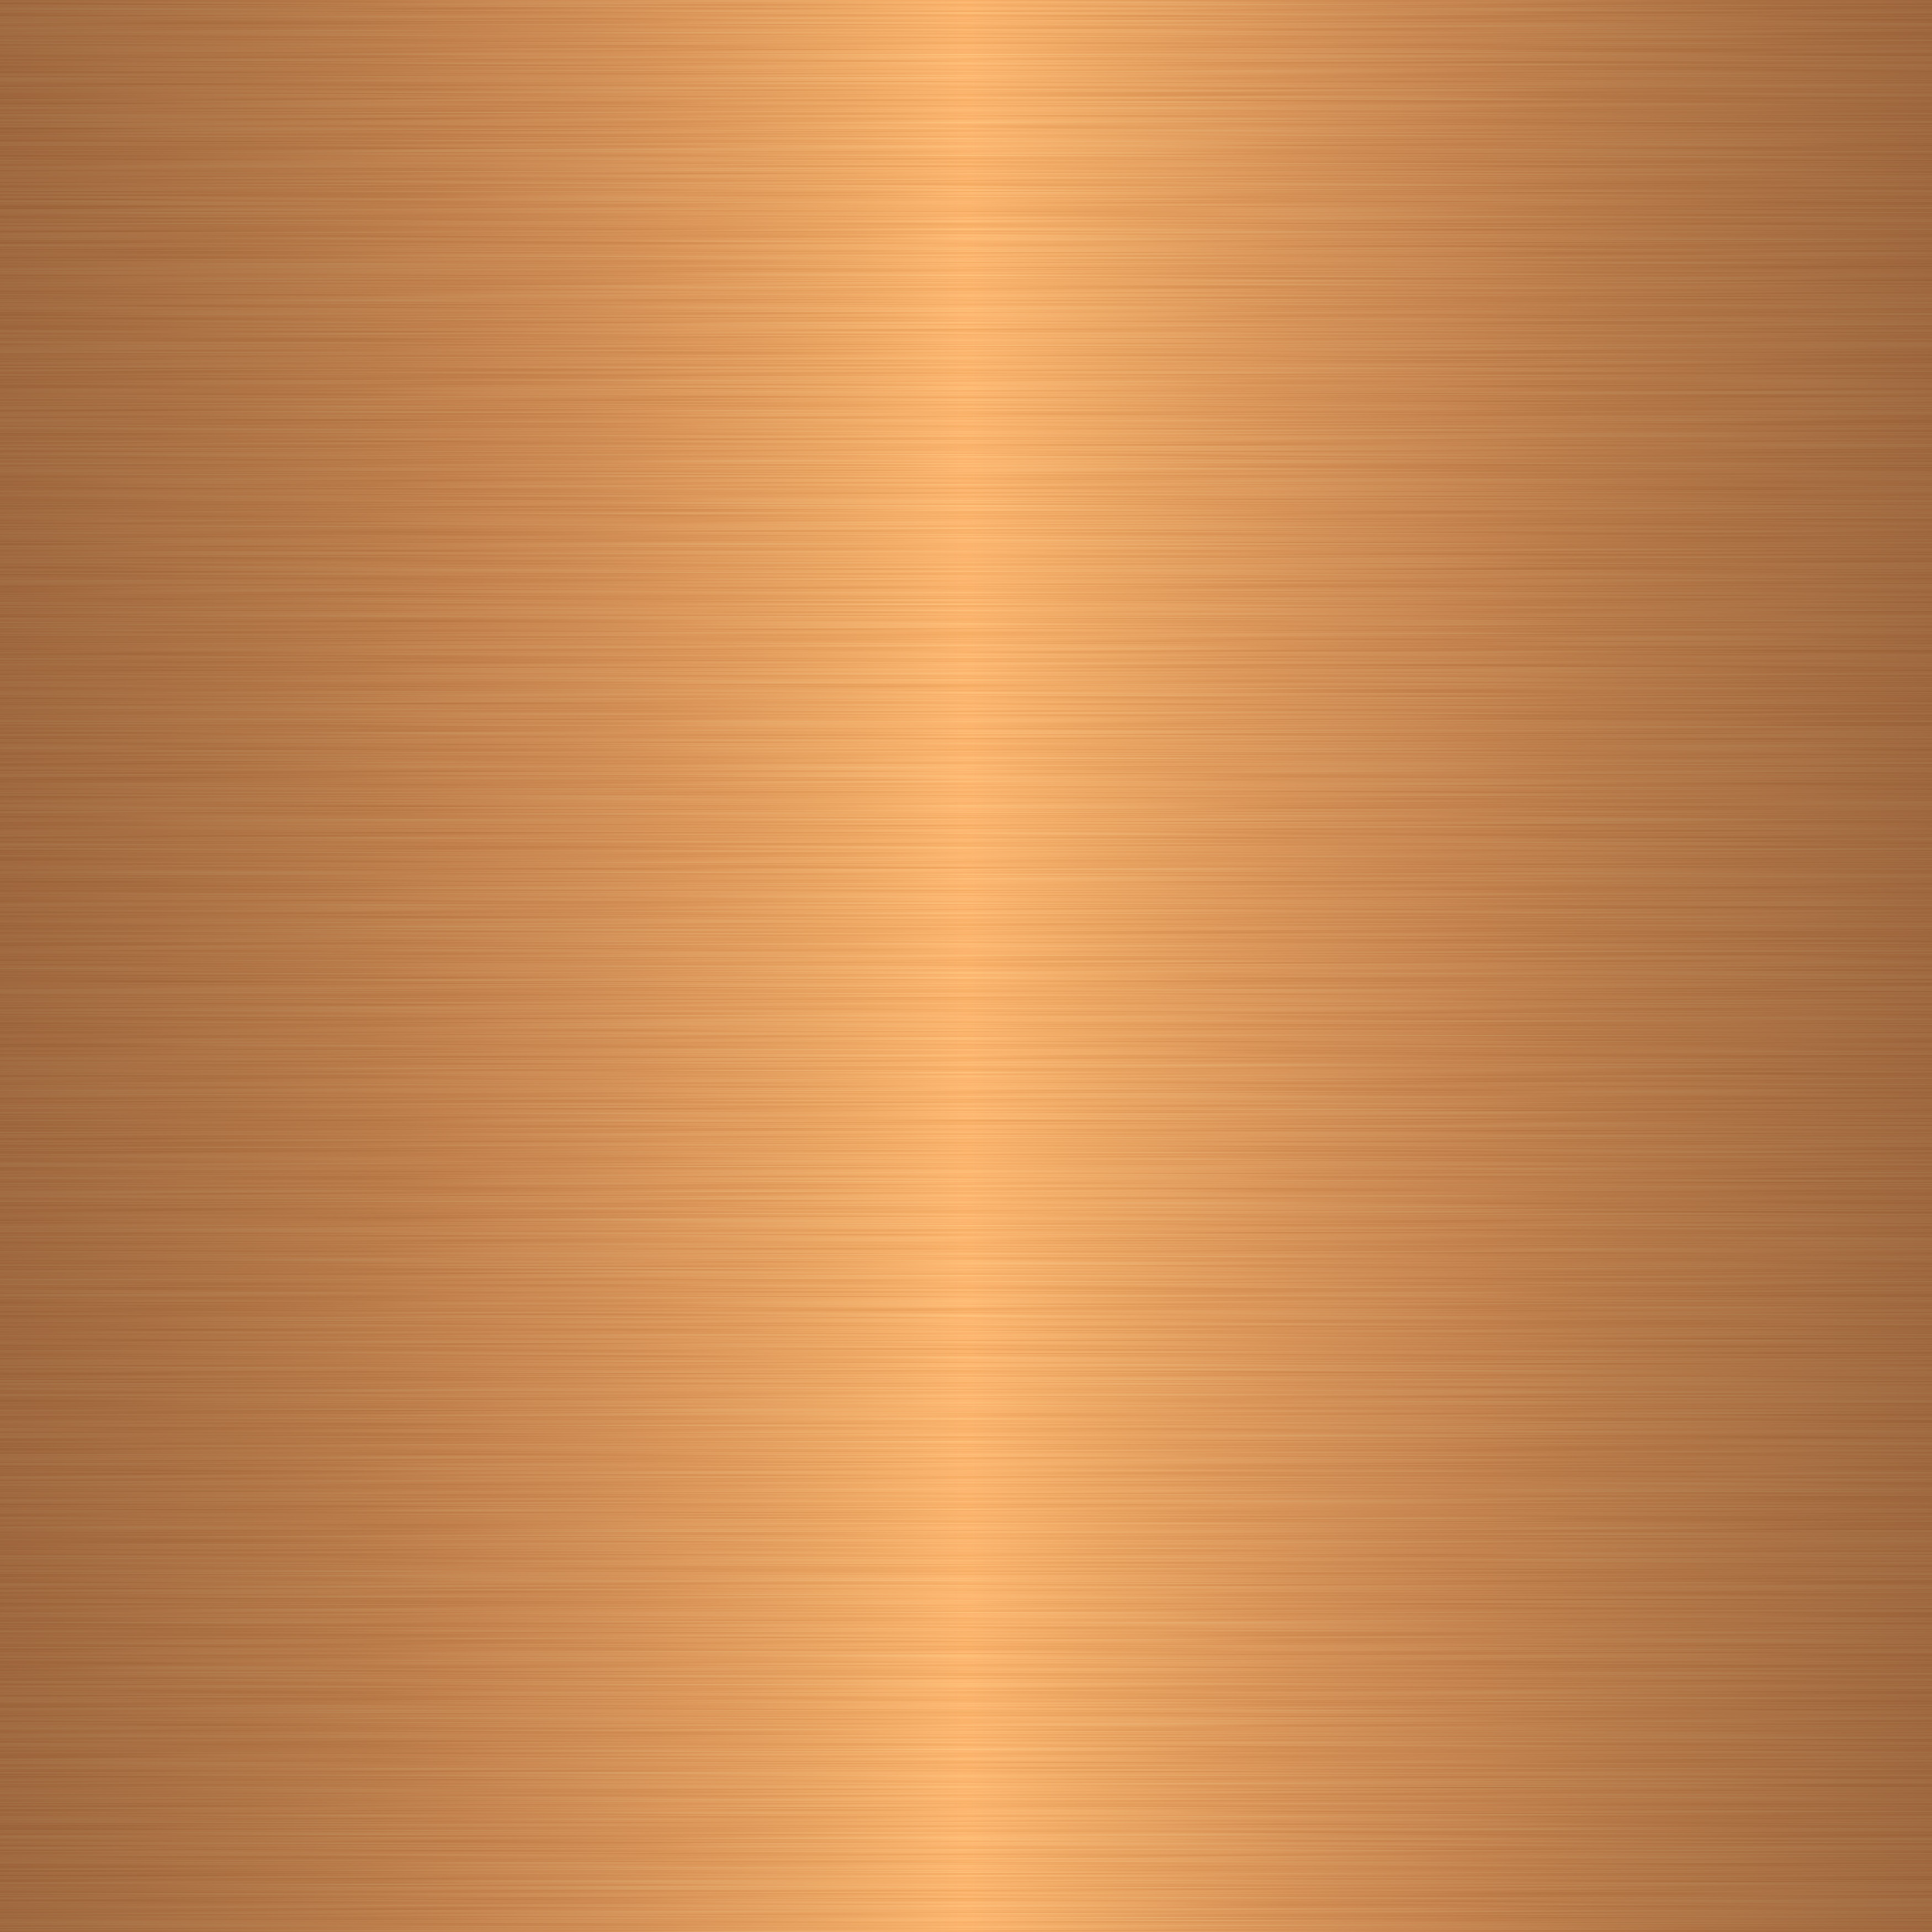 straight brushed copper texture | www.myfreetextures.com | Free